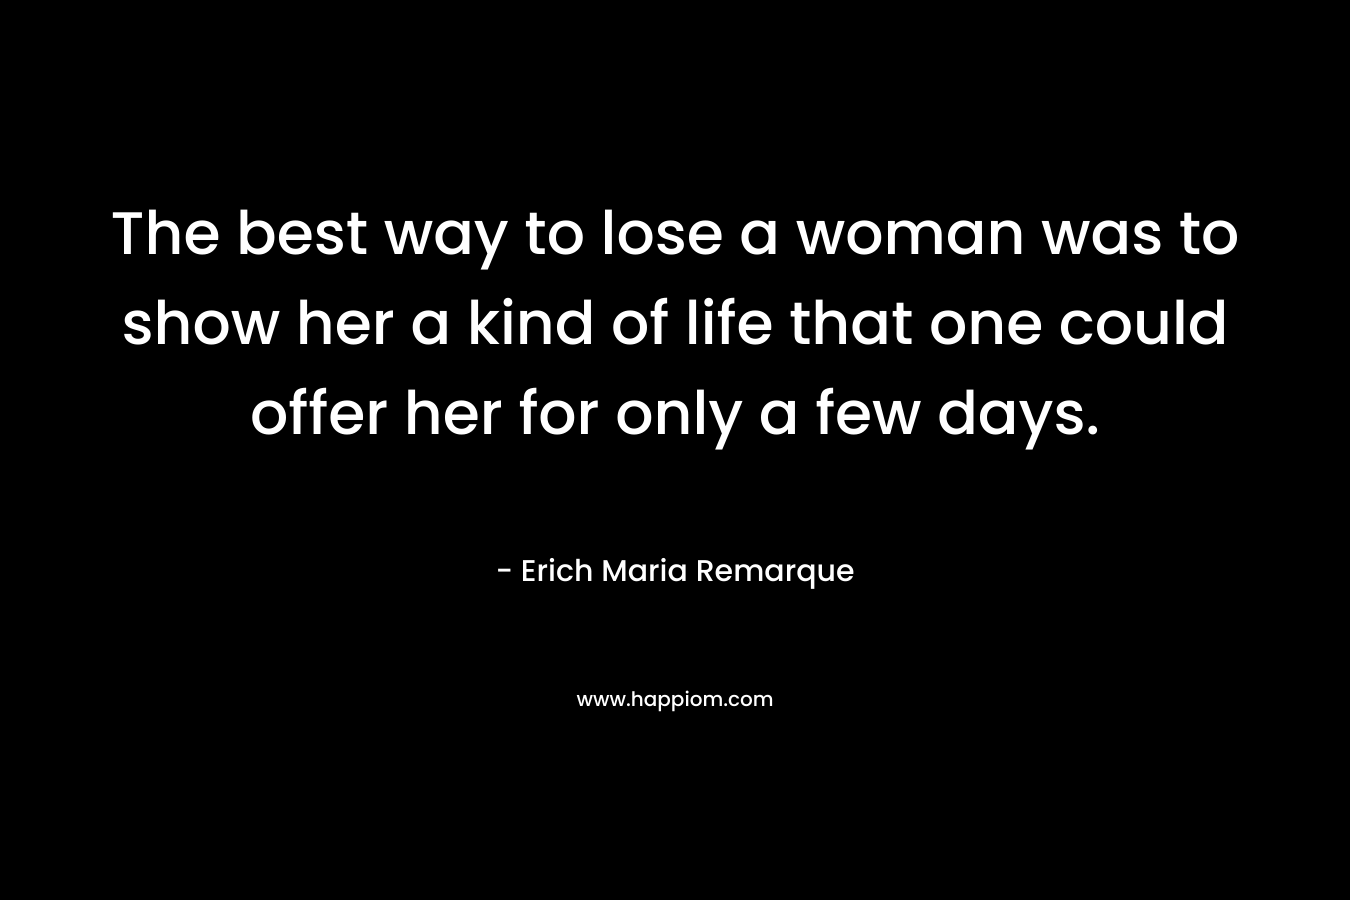 The best way to lose a woman was to show her a kind of life that one could offer her for only a few days.